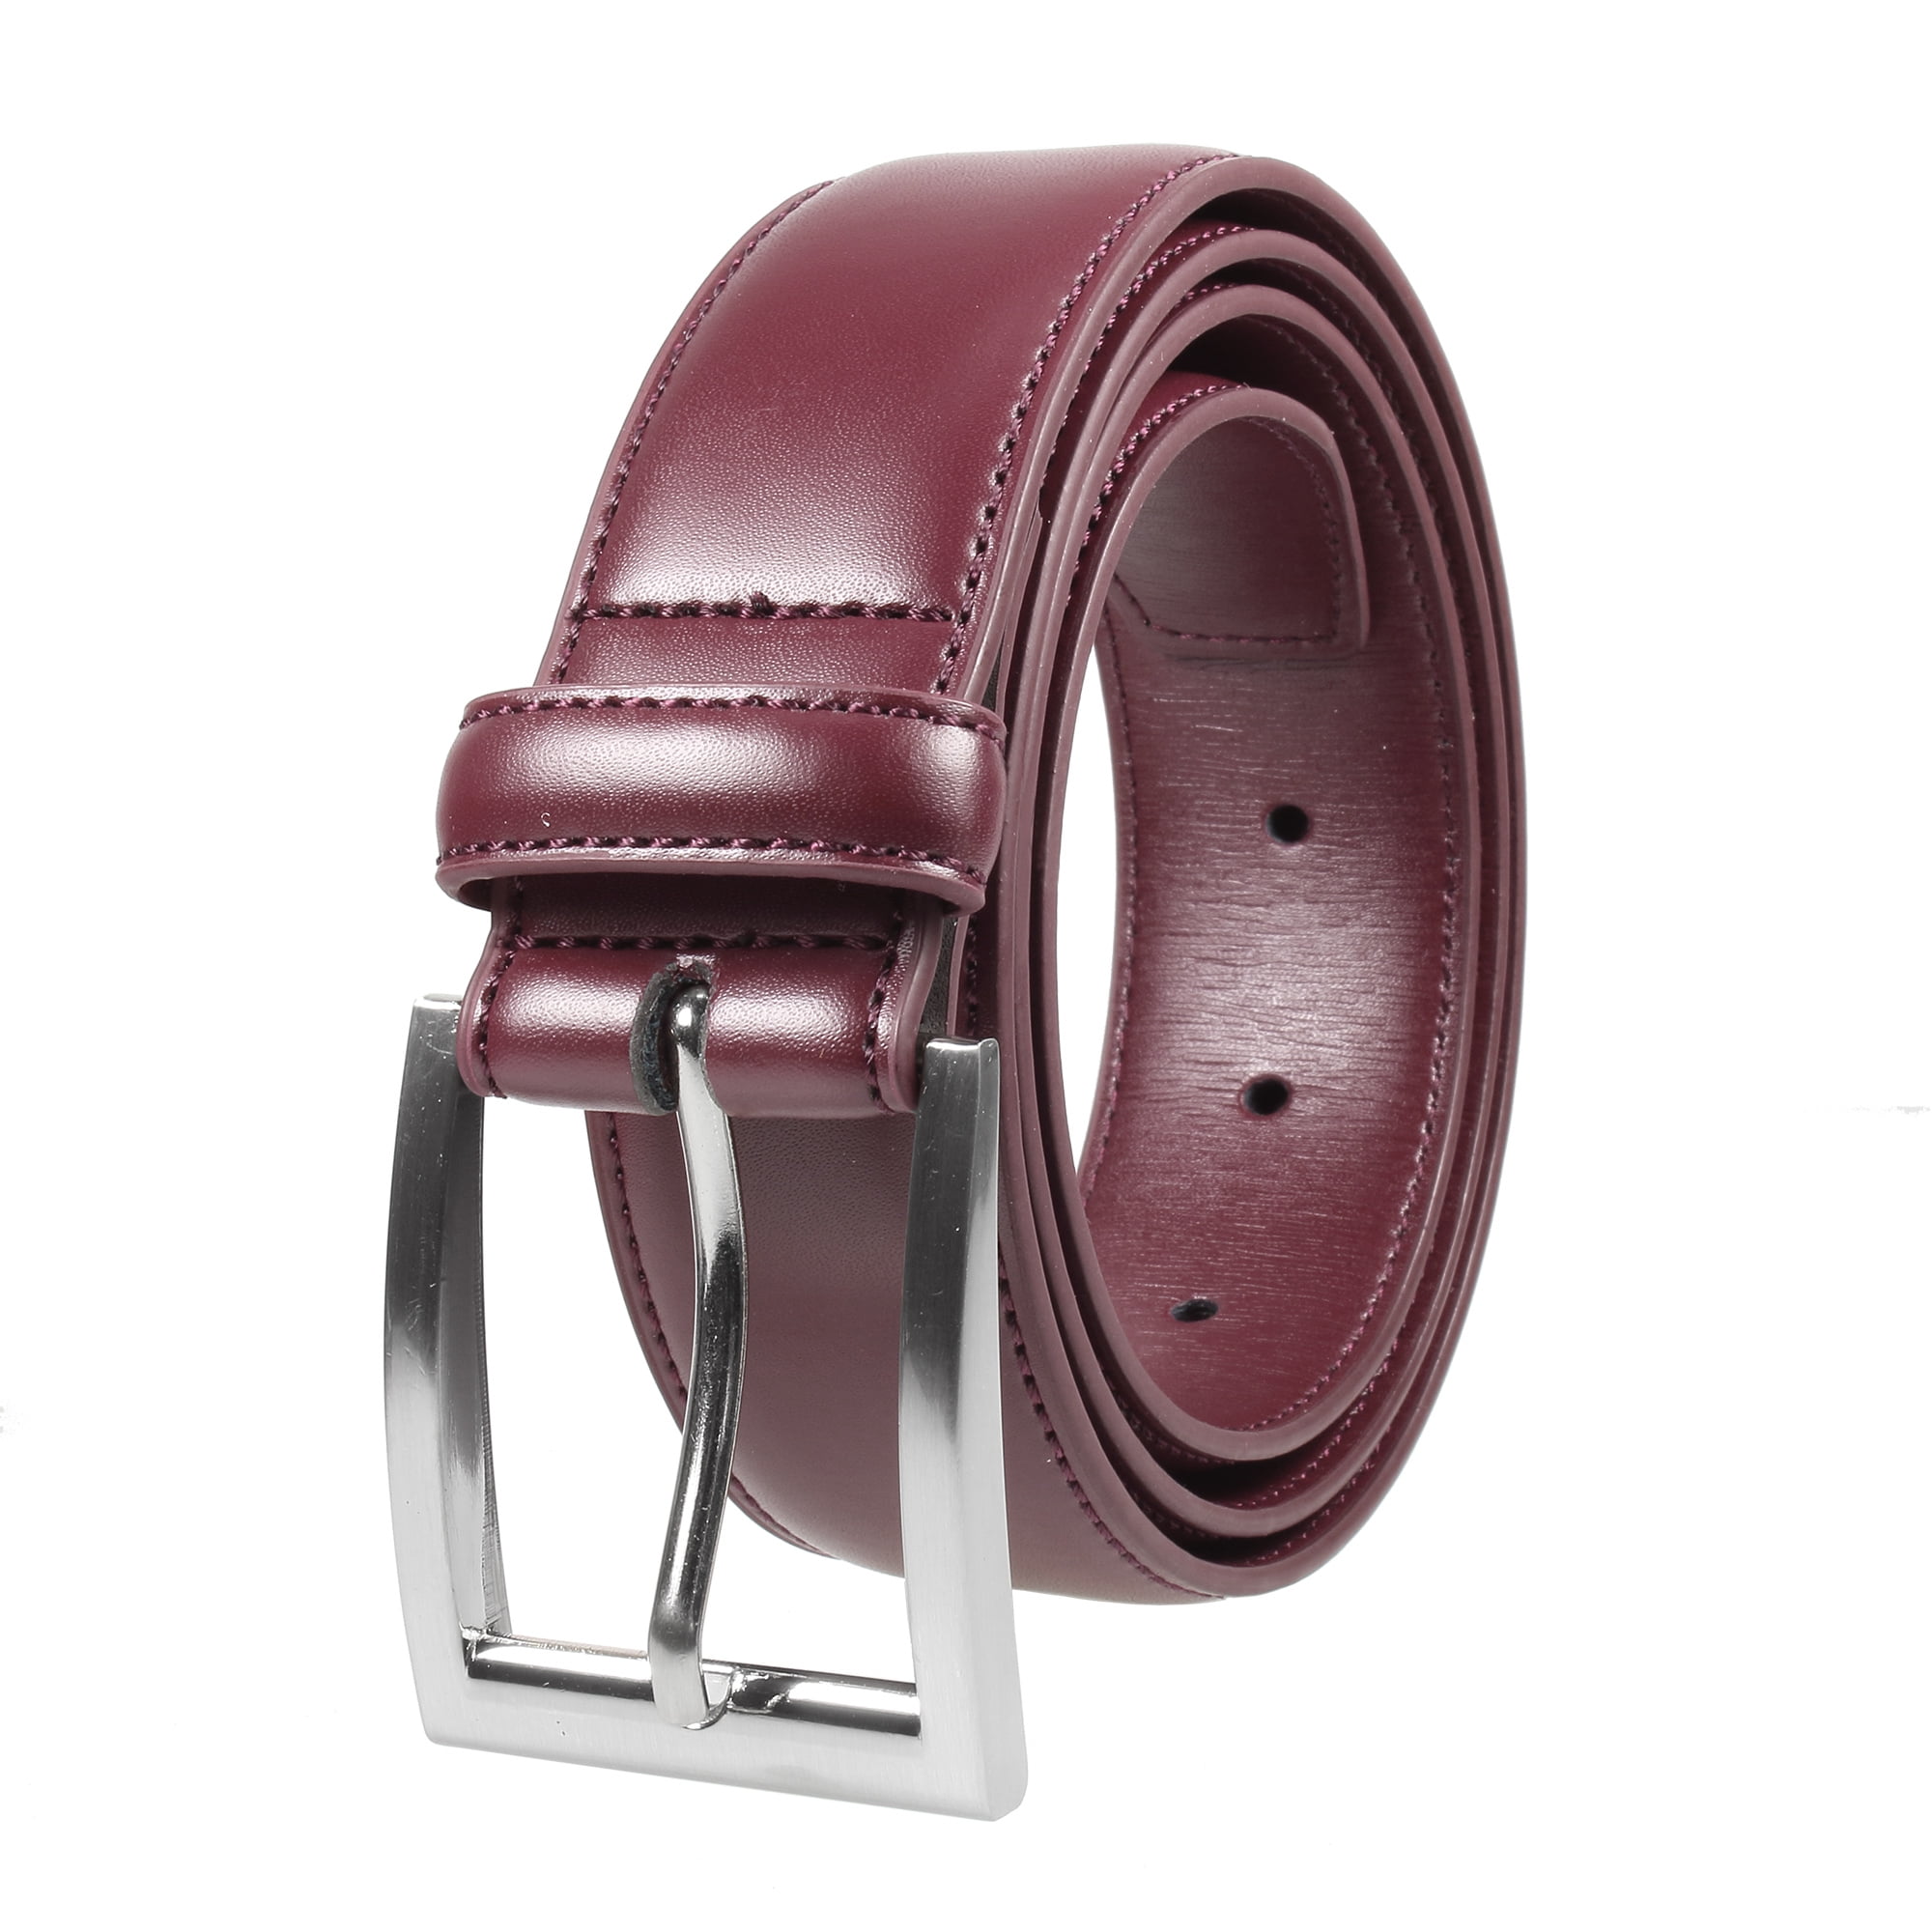 Genuine Leather Dress Belts For Men - Mens Belt For Suits, Jeans, Uniform  With Single Prong Buckle - Designed in the USA at  Men’s Clothing